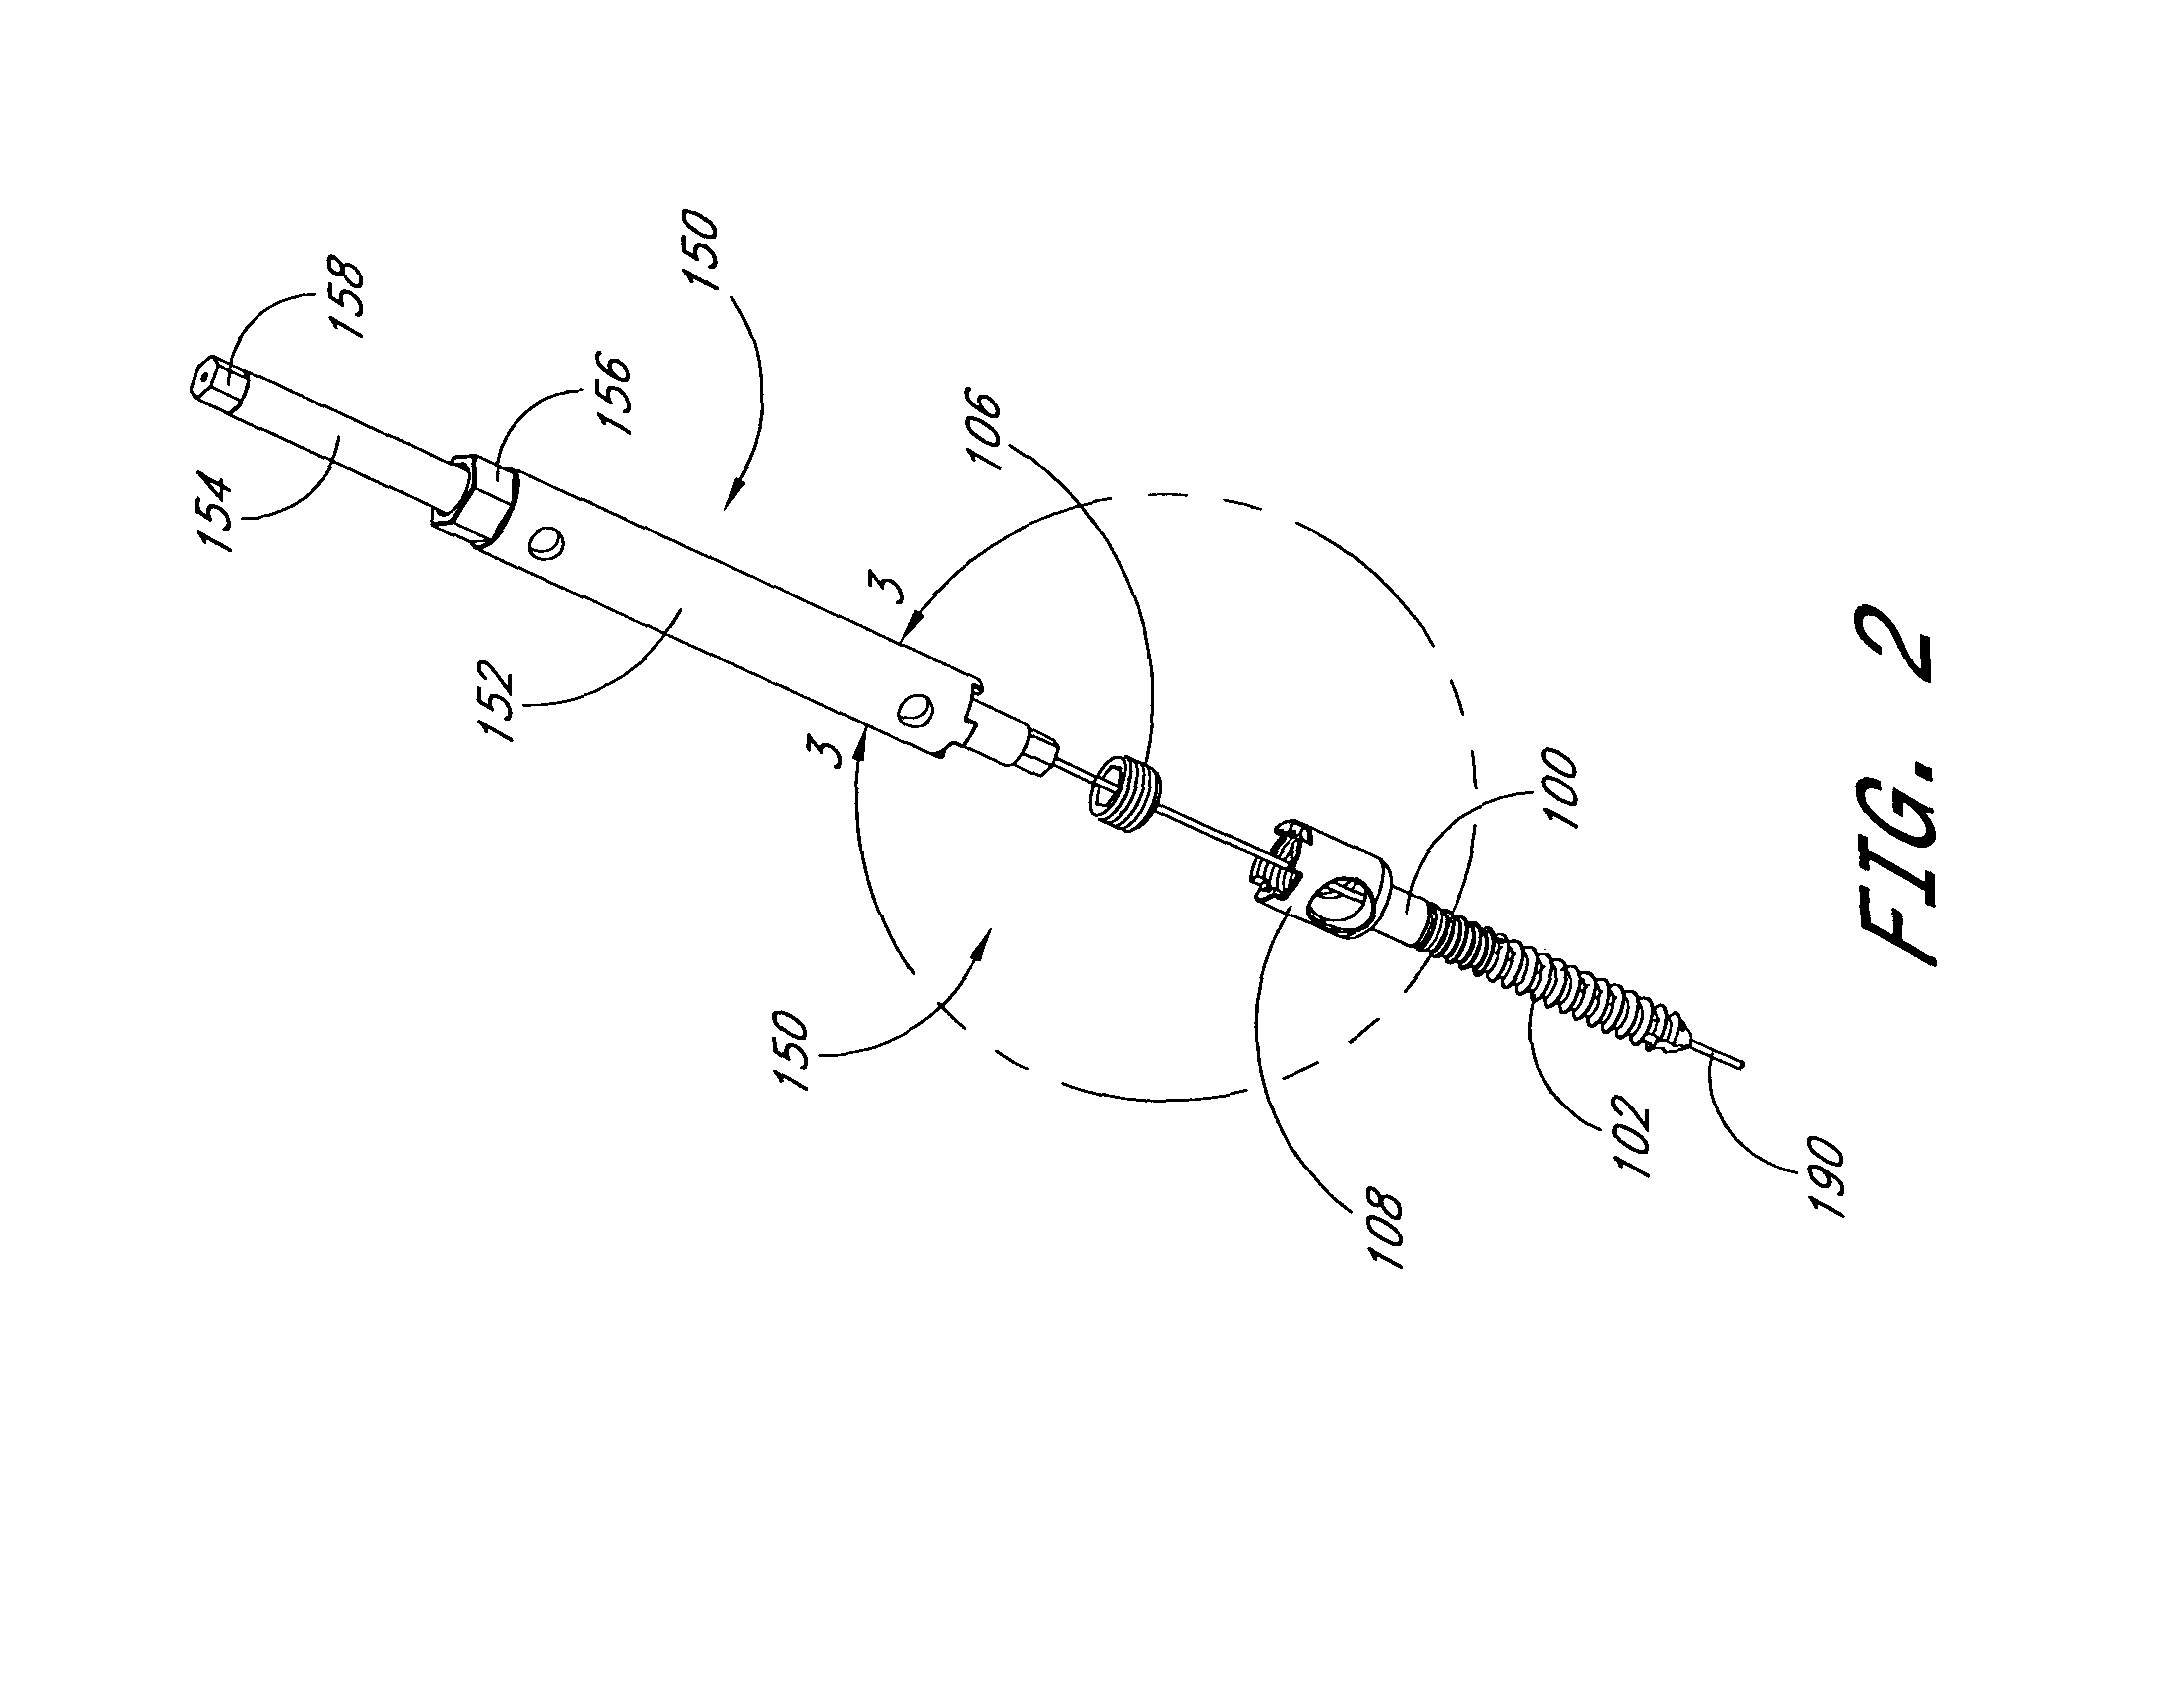 Articulating spinal fixation rod and system